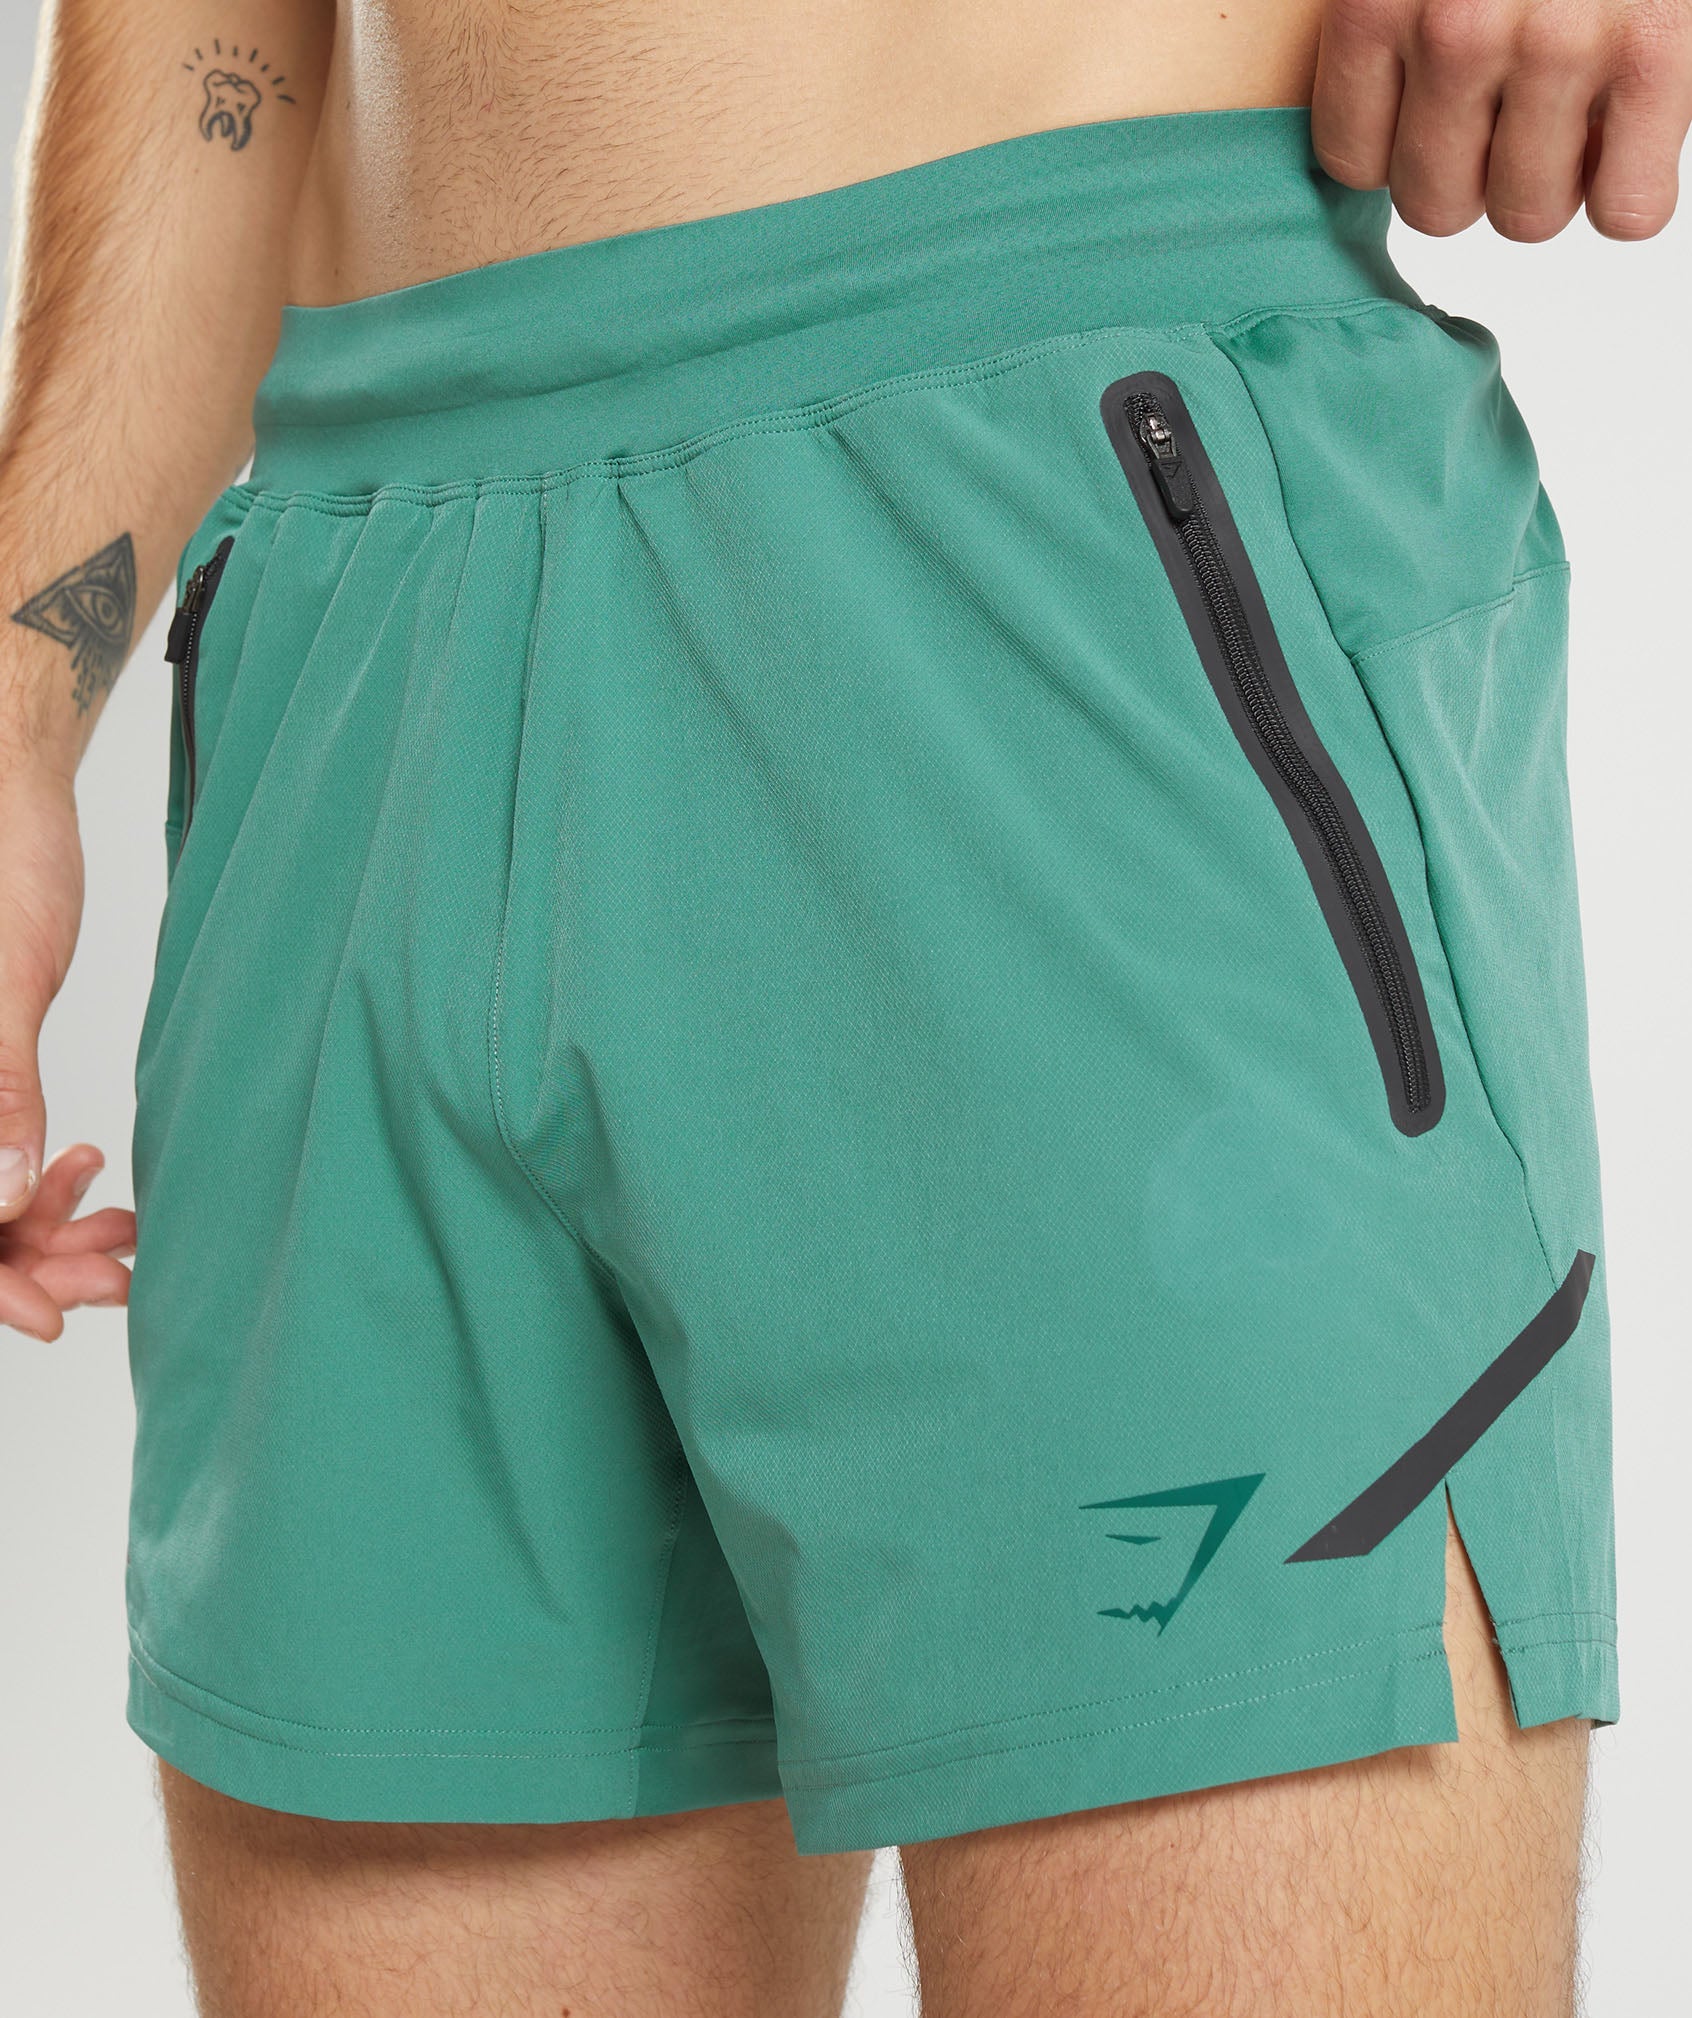 Apex 5" Perform Shorts in Hoya Green - view 5